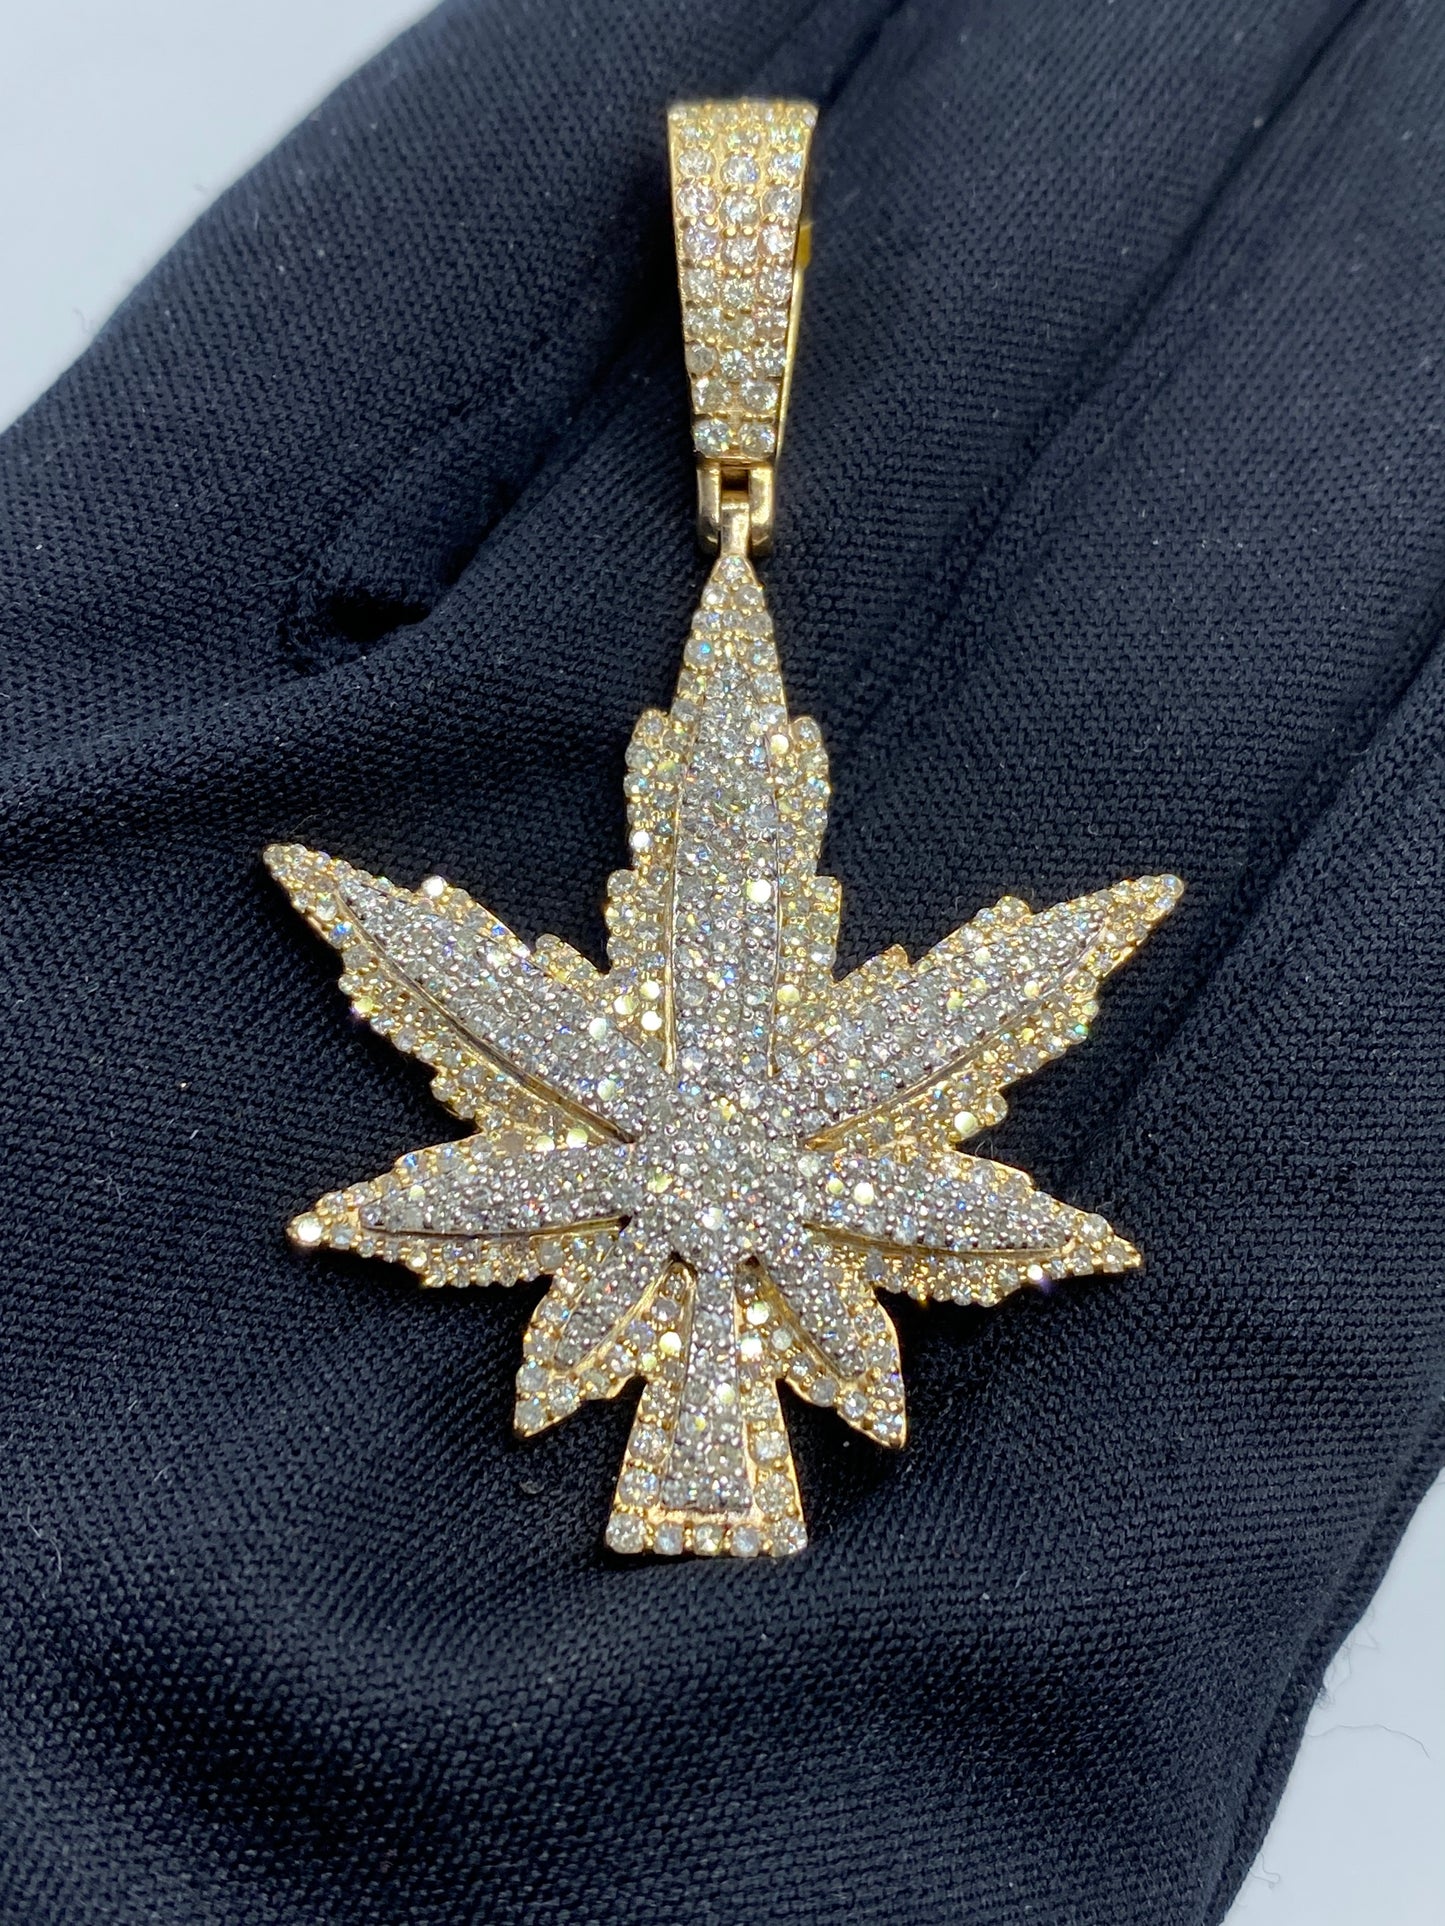 Weed Cannabis Pendant 3.7ct